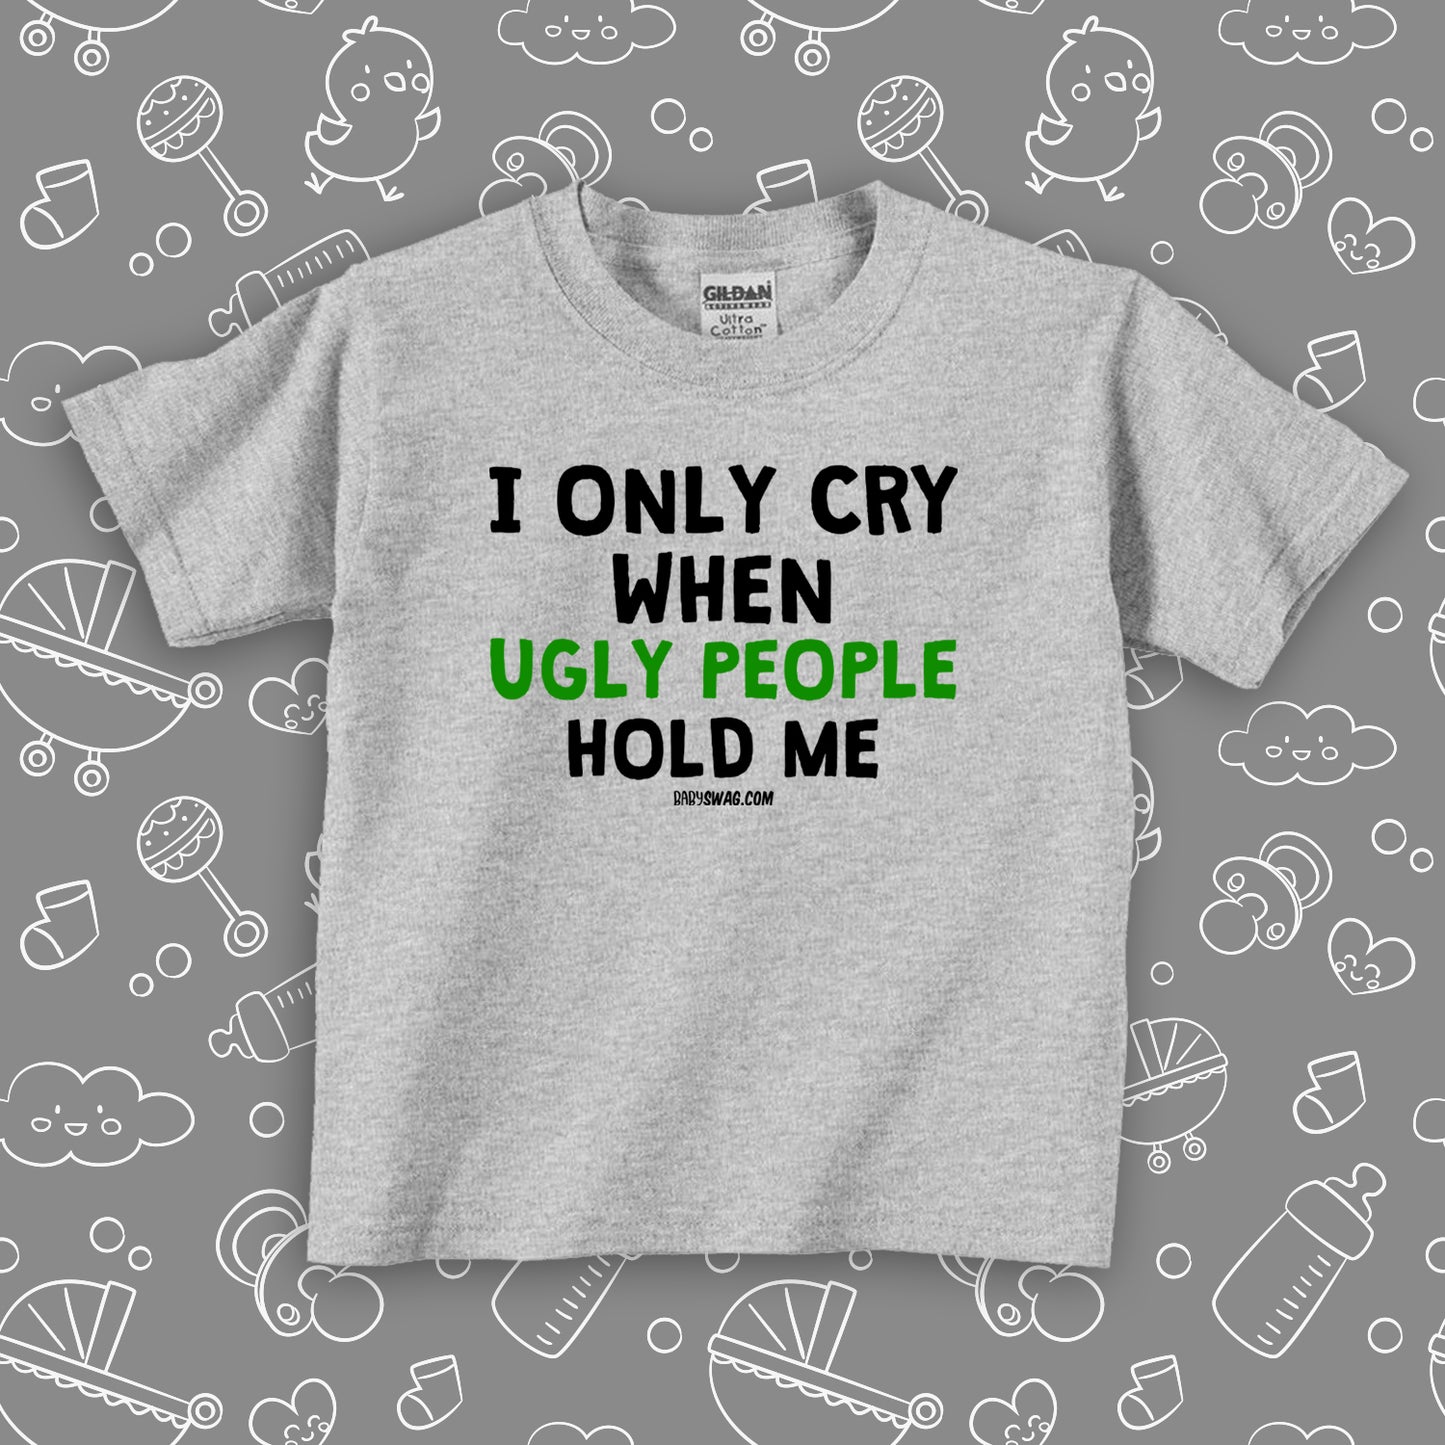 Toddler shirts with saying "I Only Cry When Ugly People Hold Me" in grey.